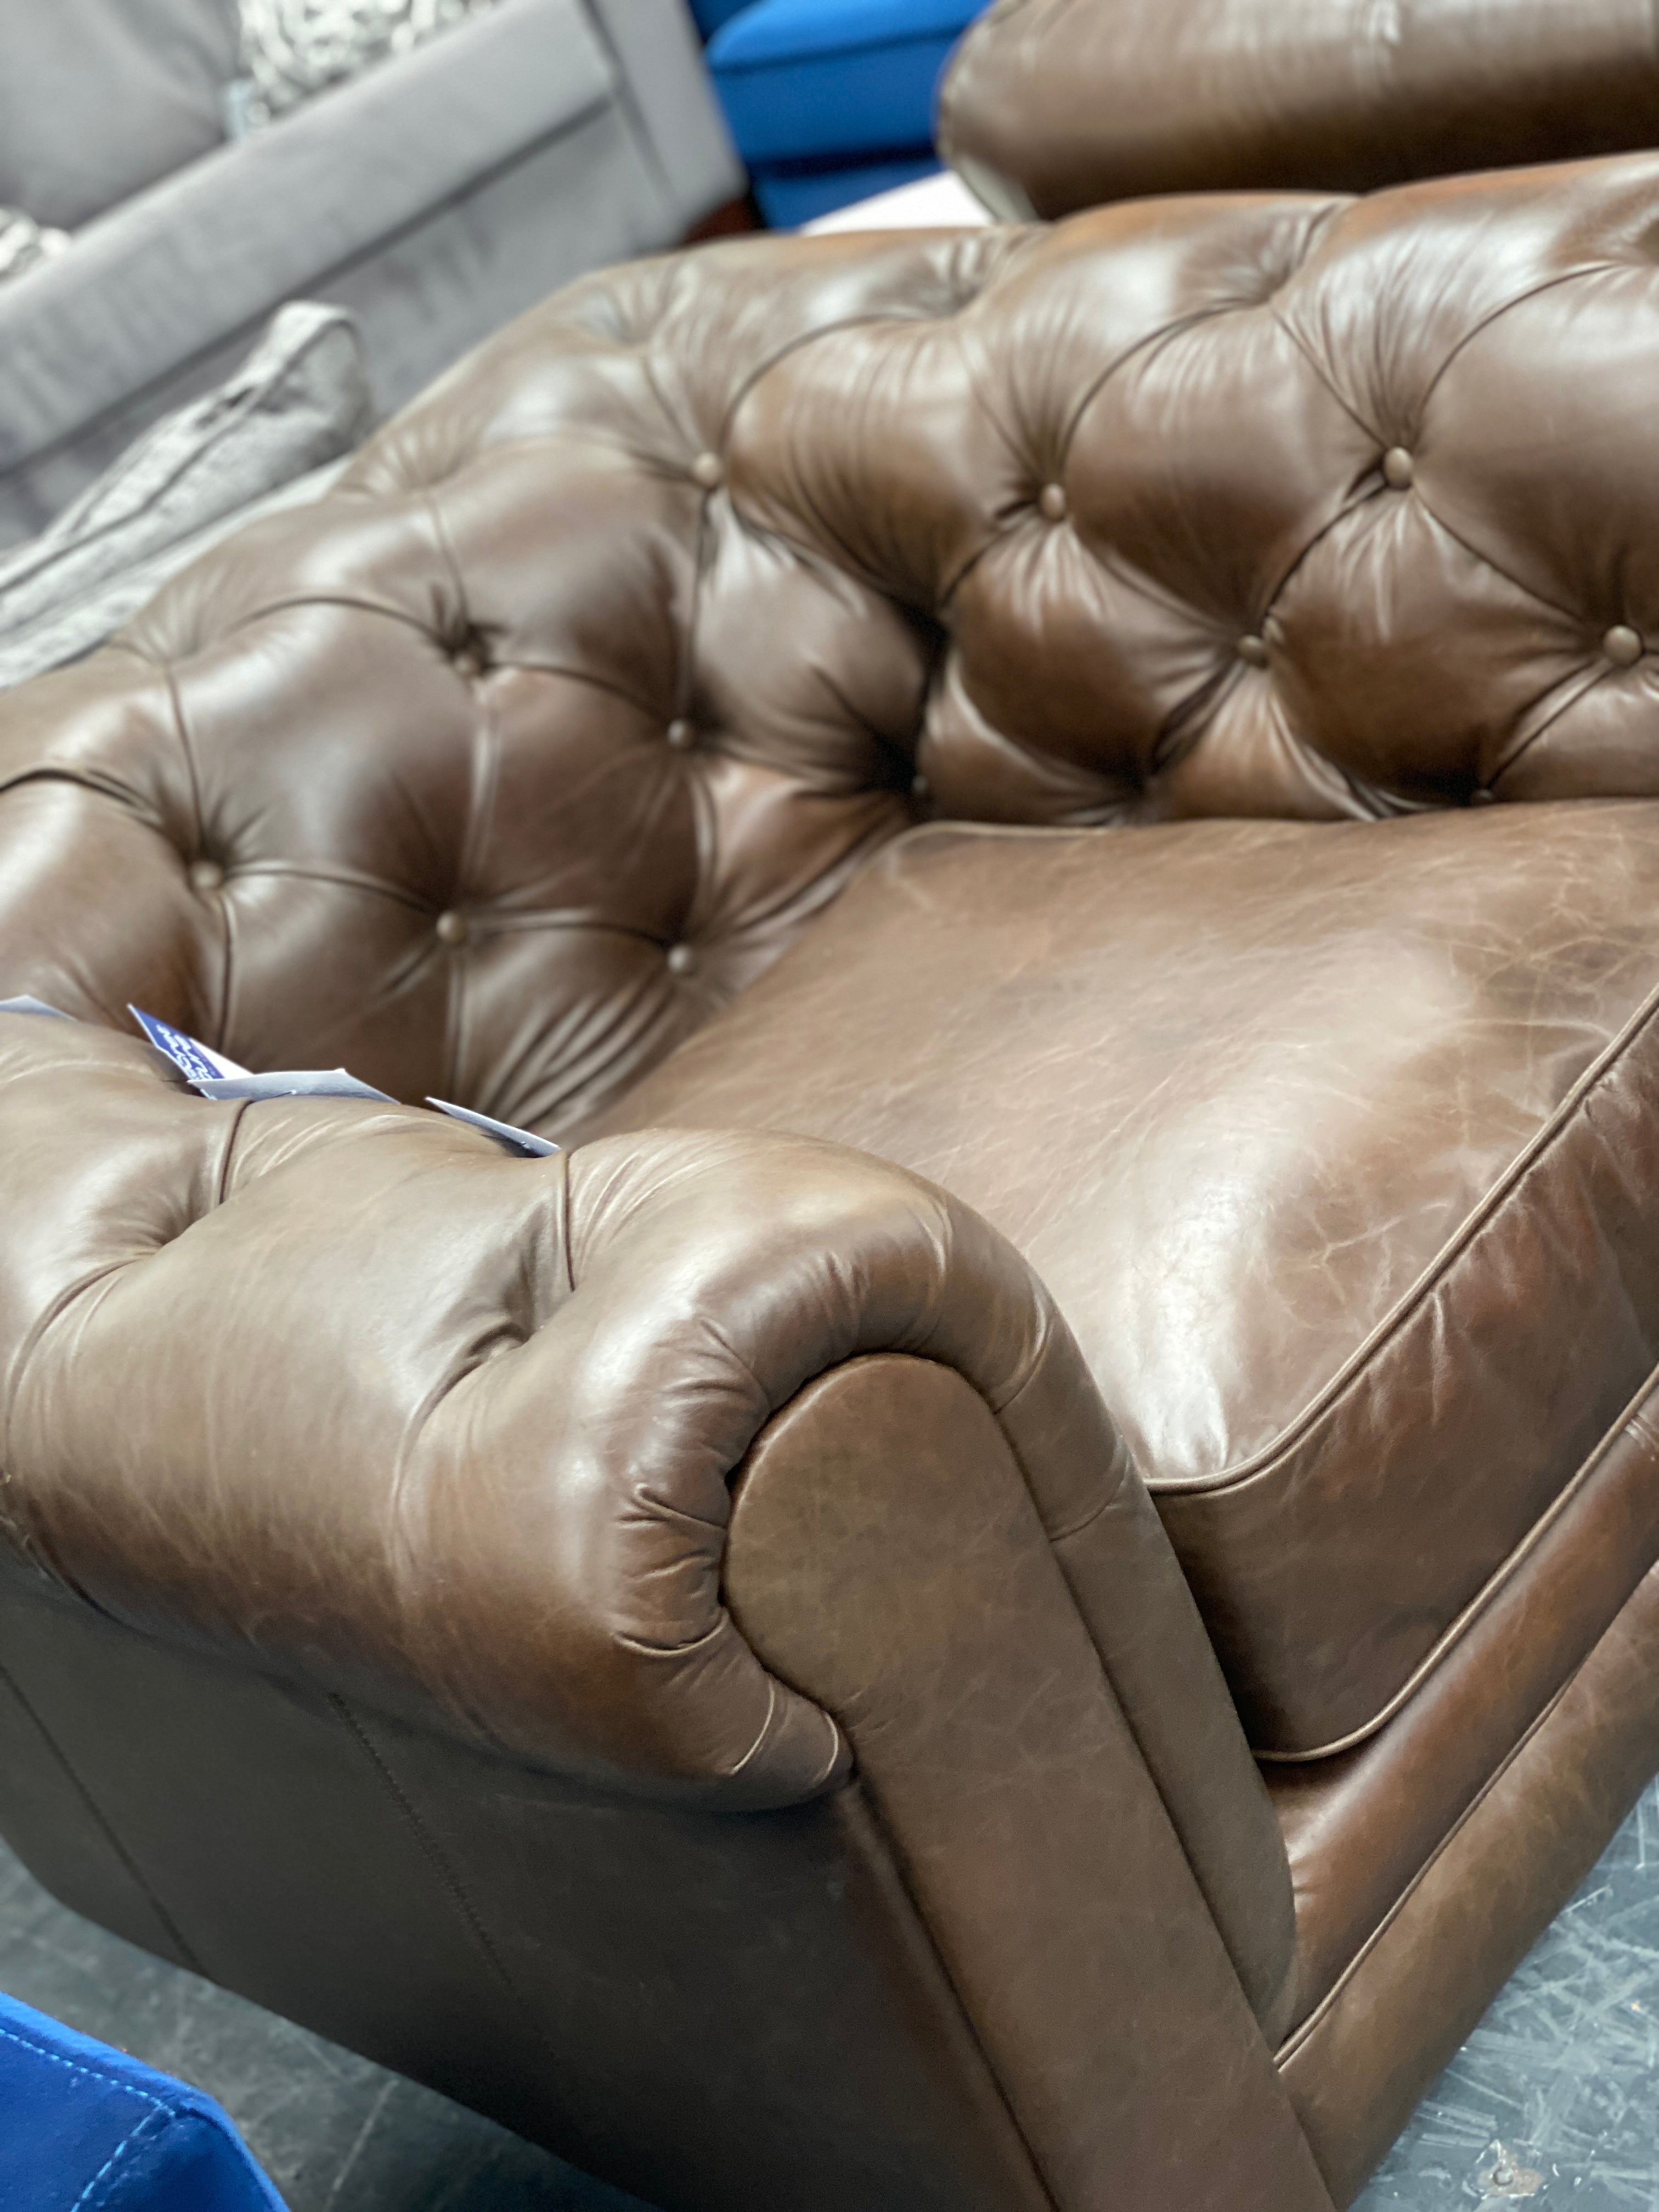 Halo Chesterfield Armchair from Top Secret Furniture